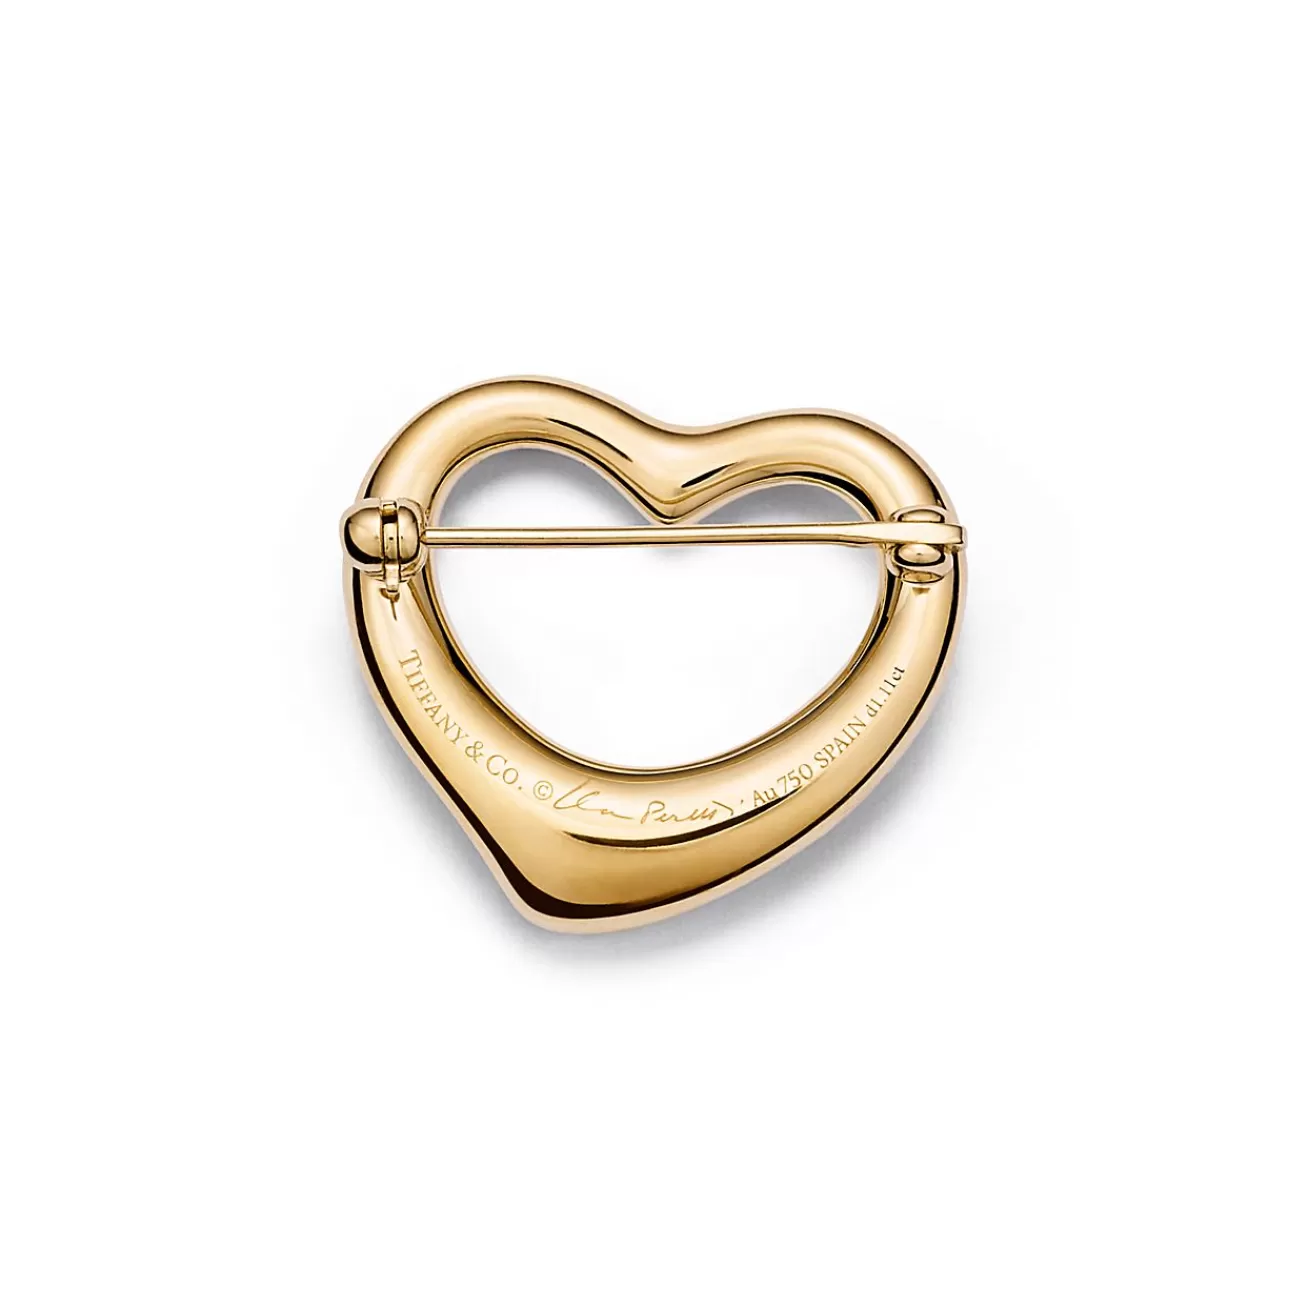 Tiffany & Co. Elsa Peretti® Open Heart Brooch in Yellow Gold with Pavé Diamonds | ^ Brooches | Gold Jewelry